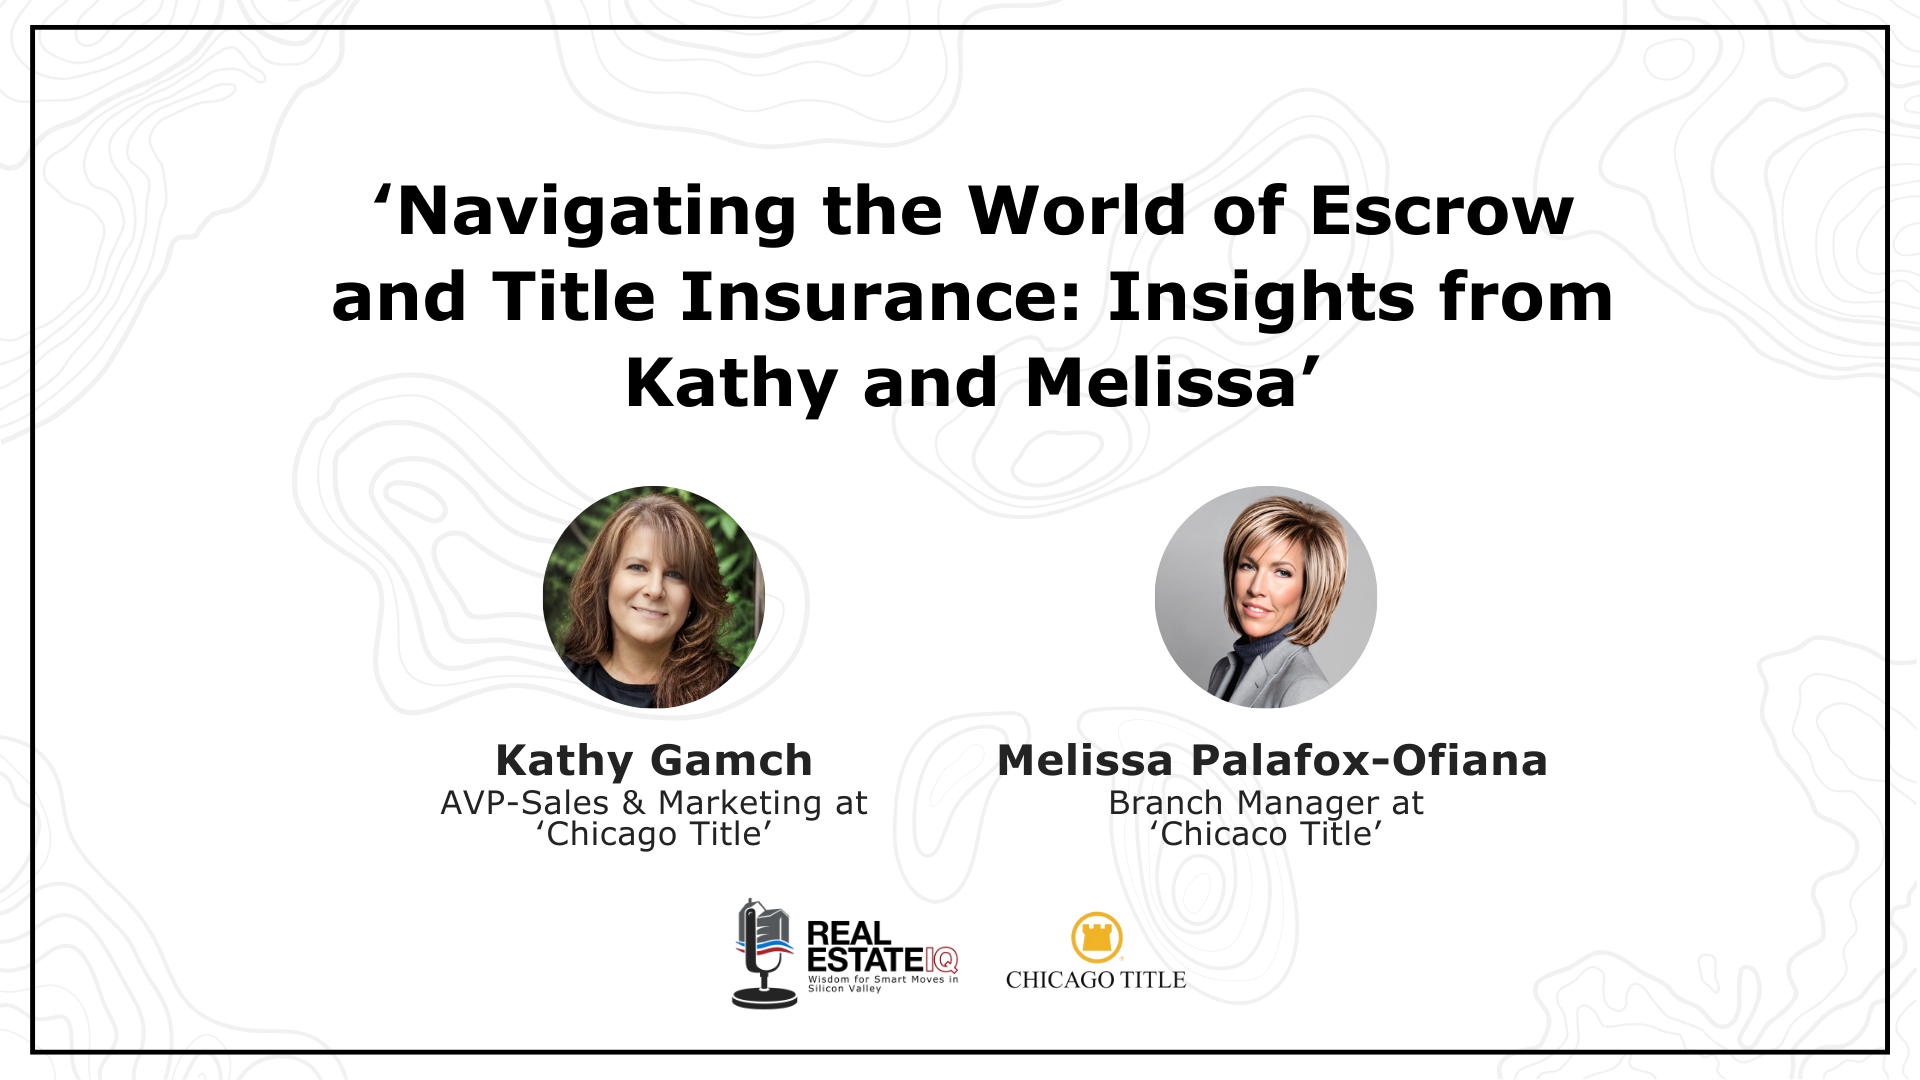 Navigating the World of Escrow and Title Insurance: Insights from Kathy and Melissa Video